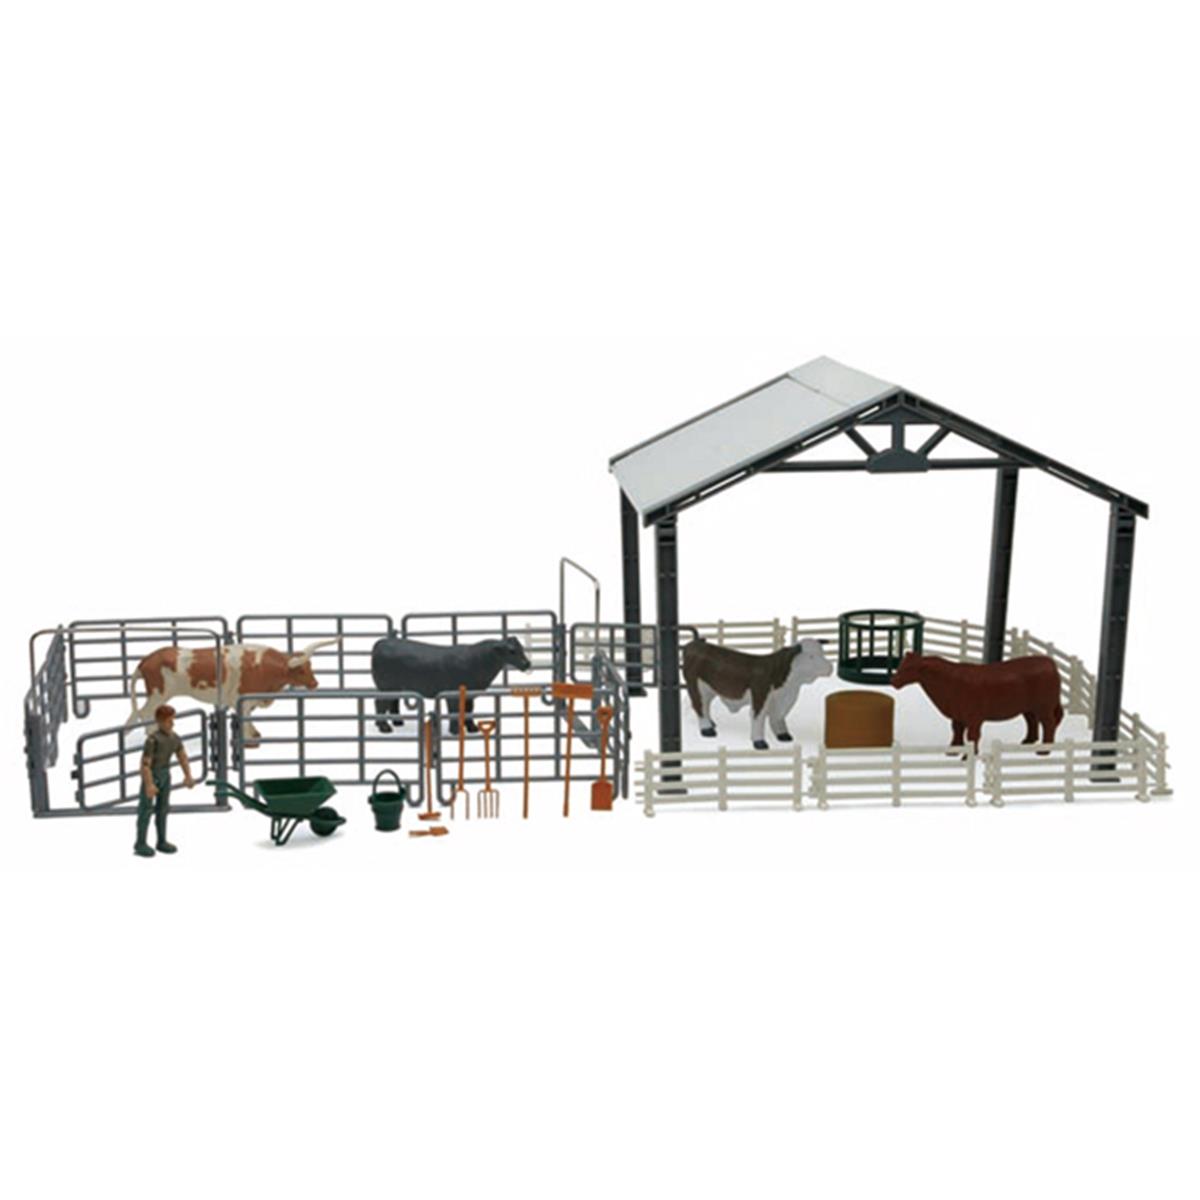 New-ray Newss-05135 1 By 18 Scale Pole Barn Ranch Playset